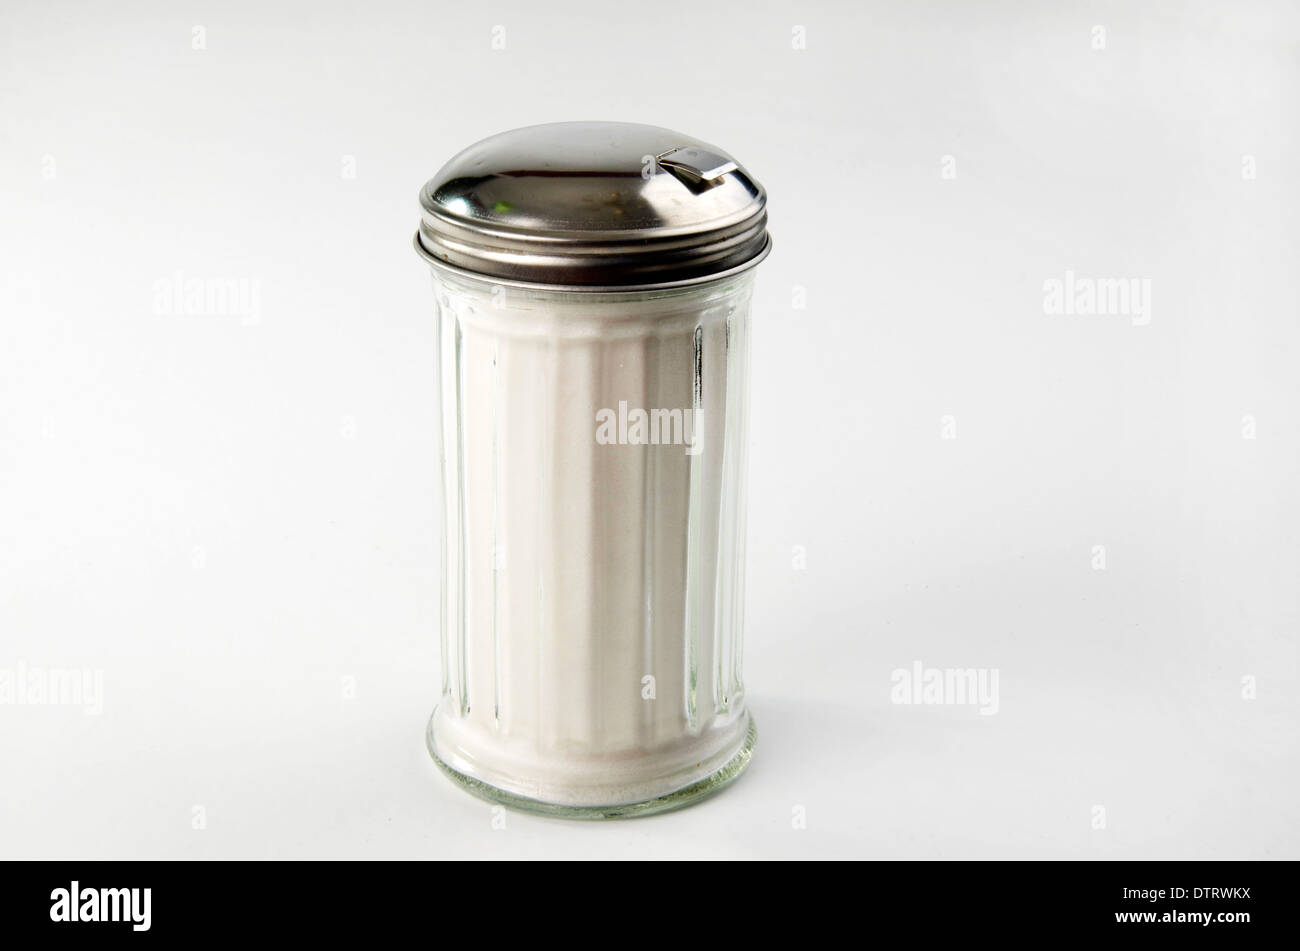 Classic sugar container filled with sugar. Stock Photo